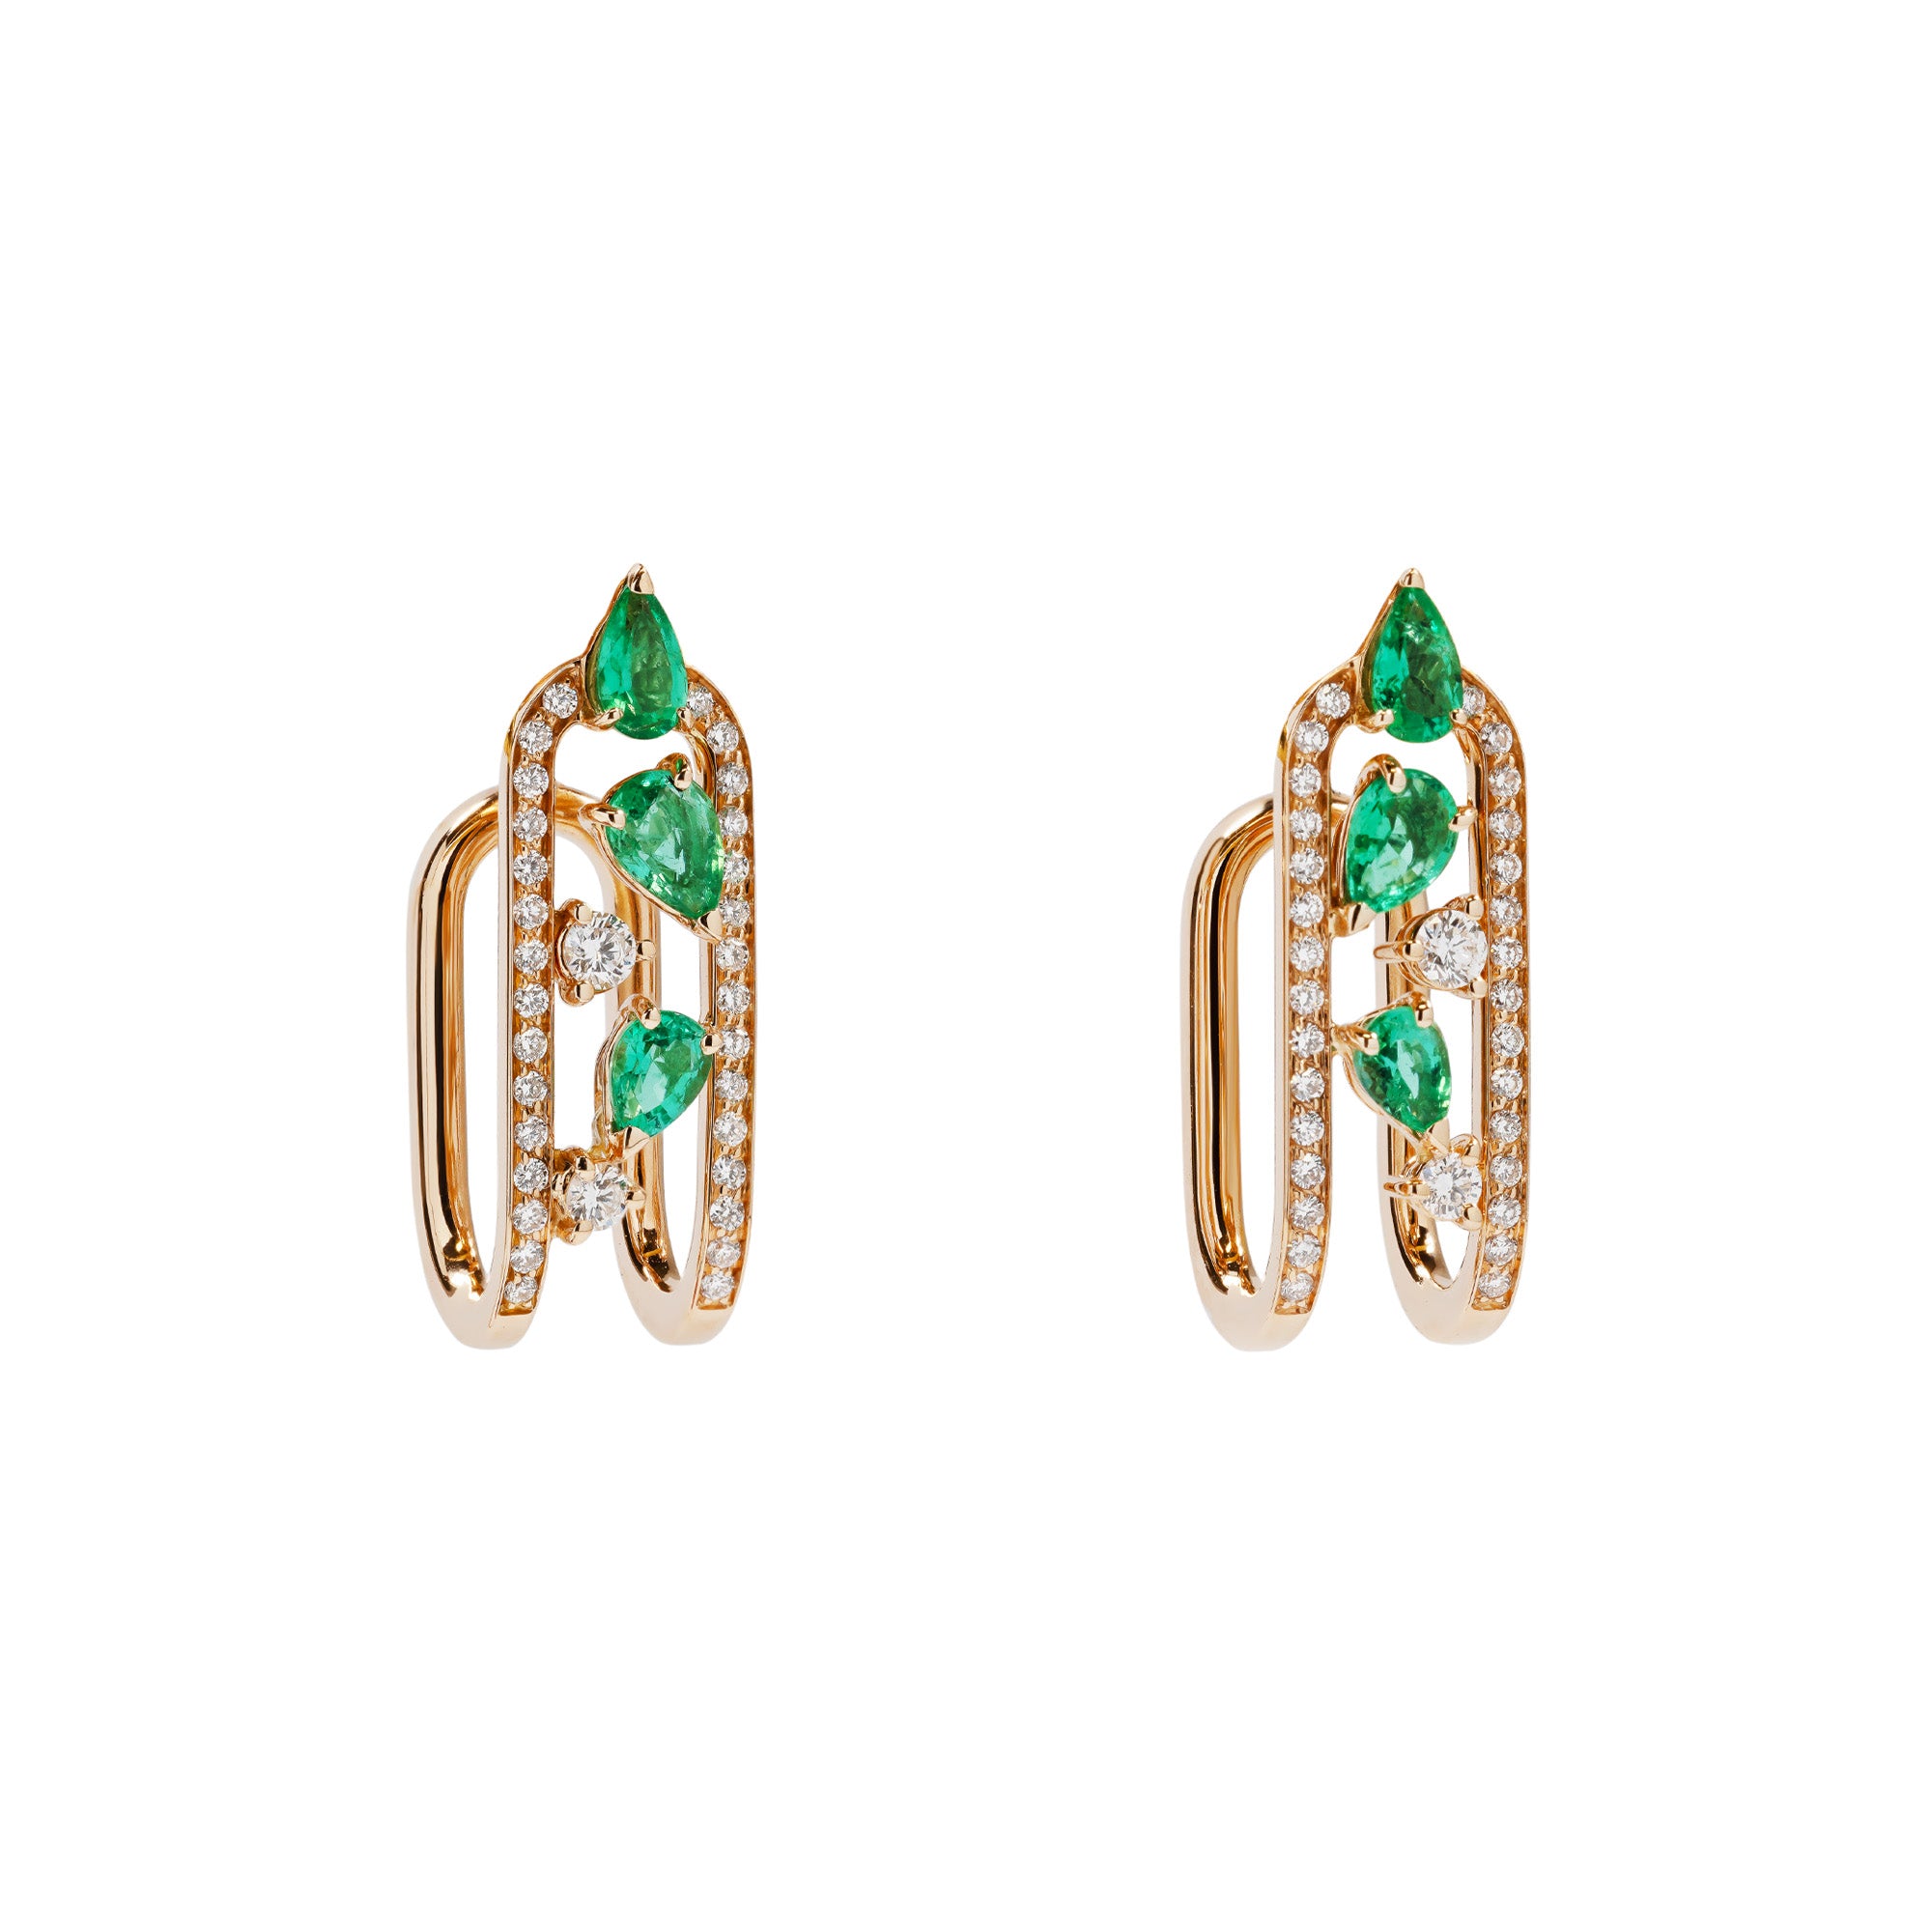 Clip Rose Gold Earrings With Emeralds And Diamonds